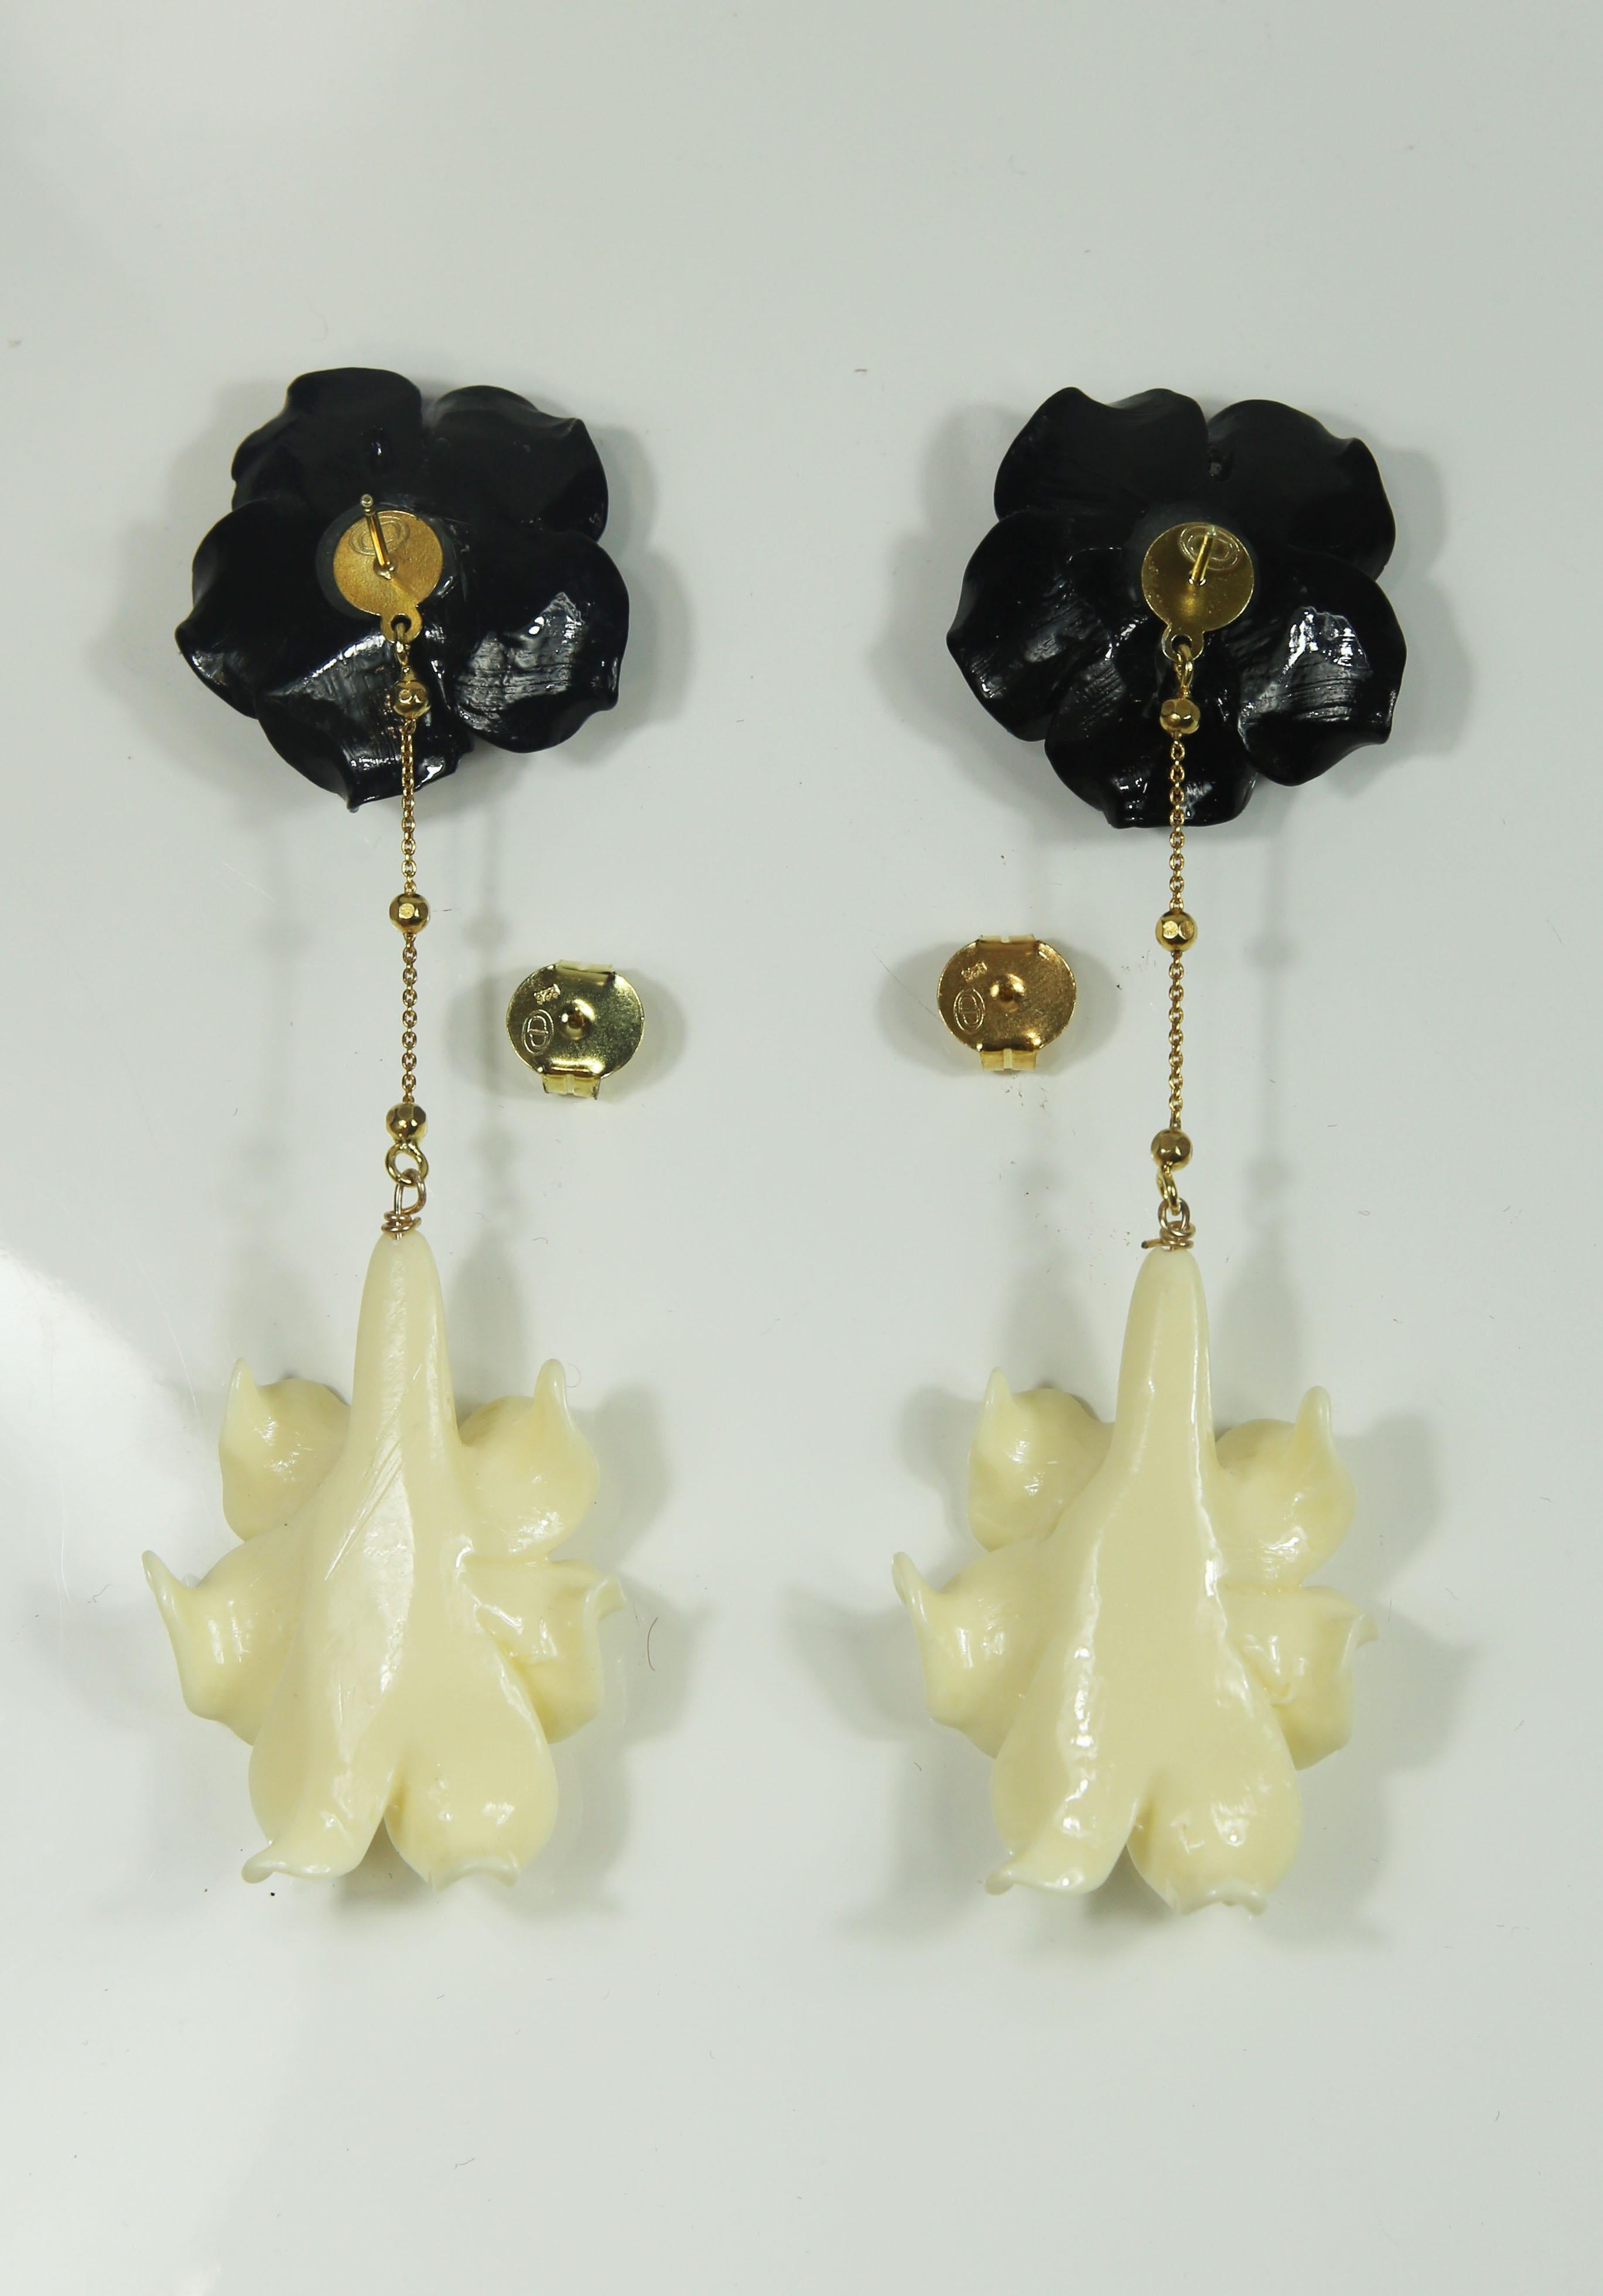 Romantic Black and White Power, Colored Flowers Resins in Gold-Plated Silver Clasps